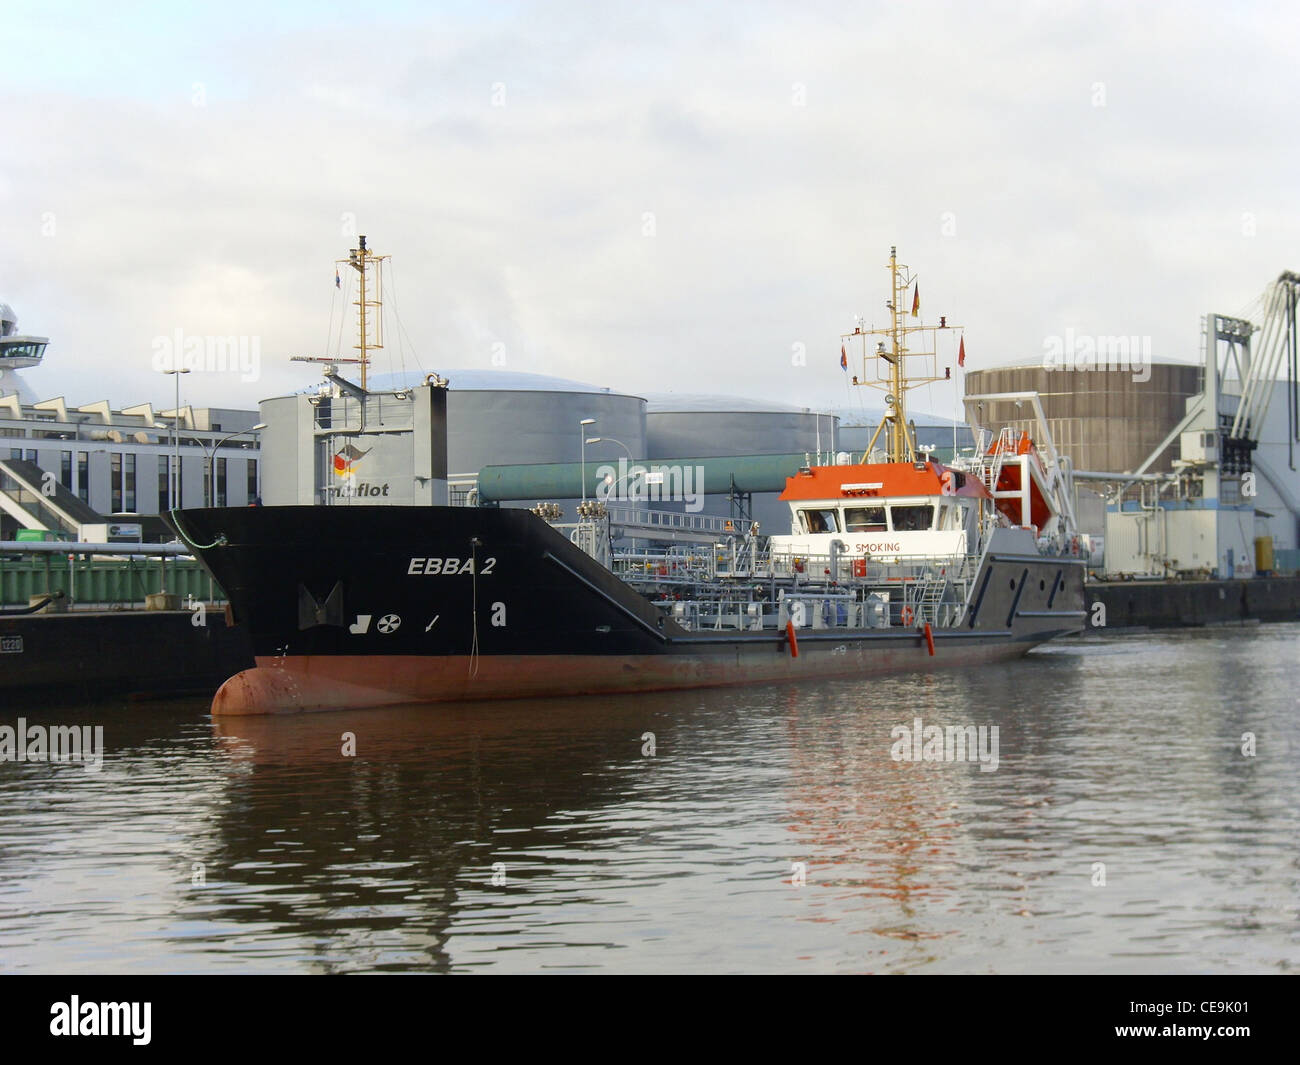 The oiltanker Ebba 2 in Bremerhaven, Germany Stock Photo